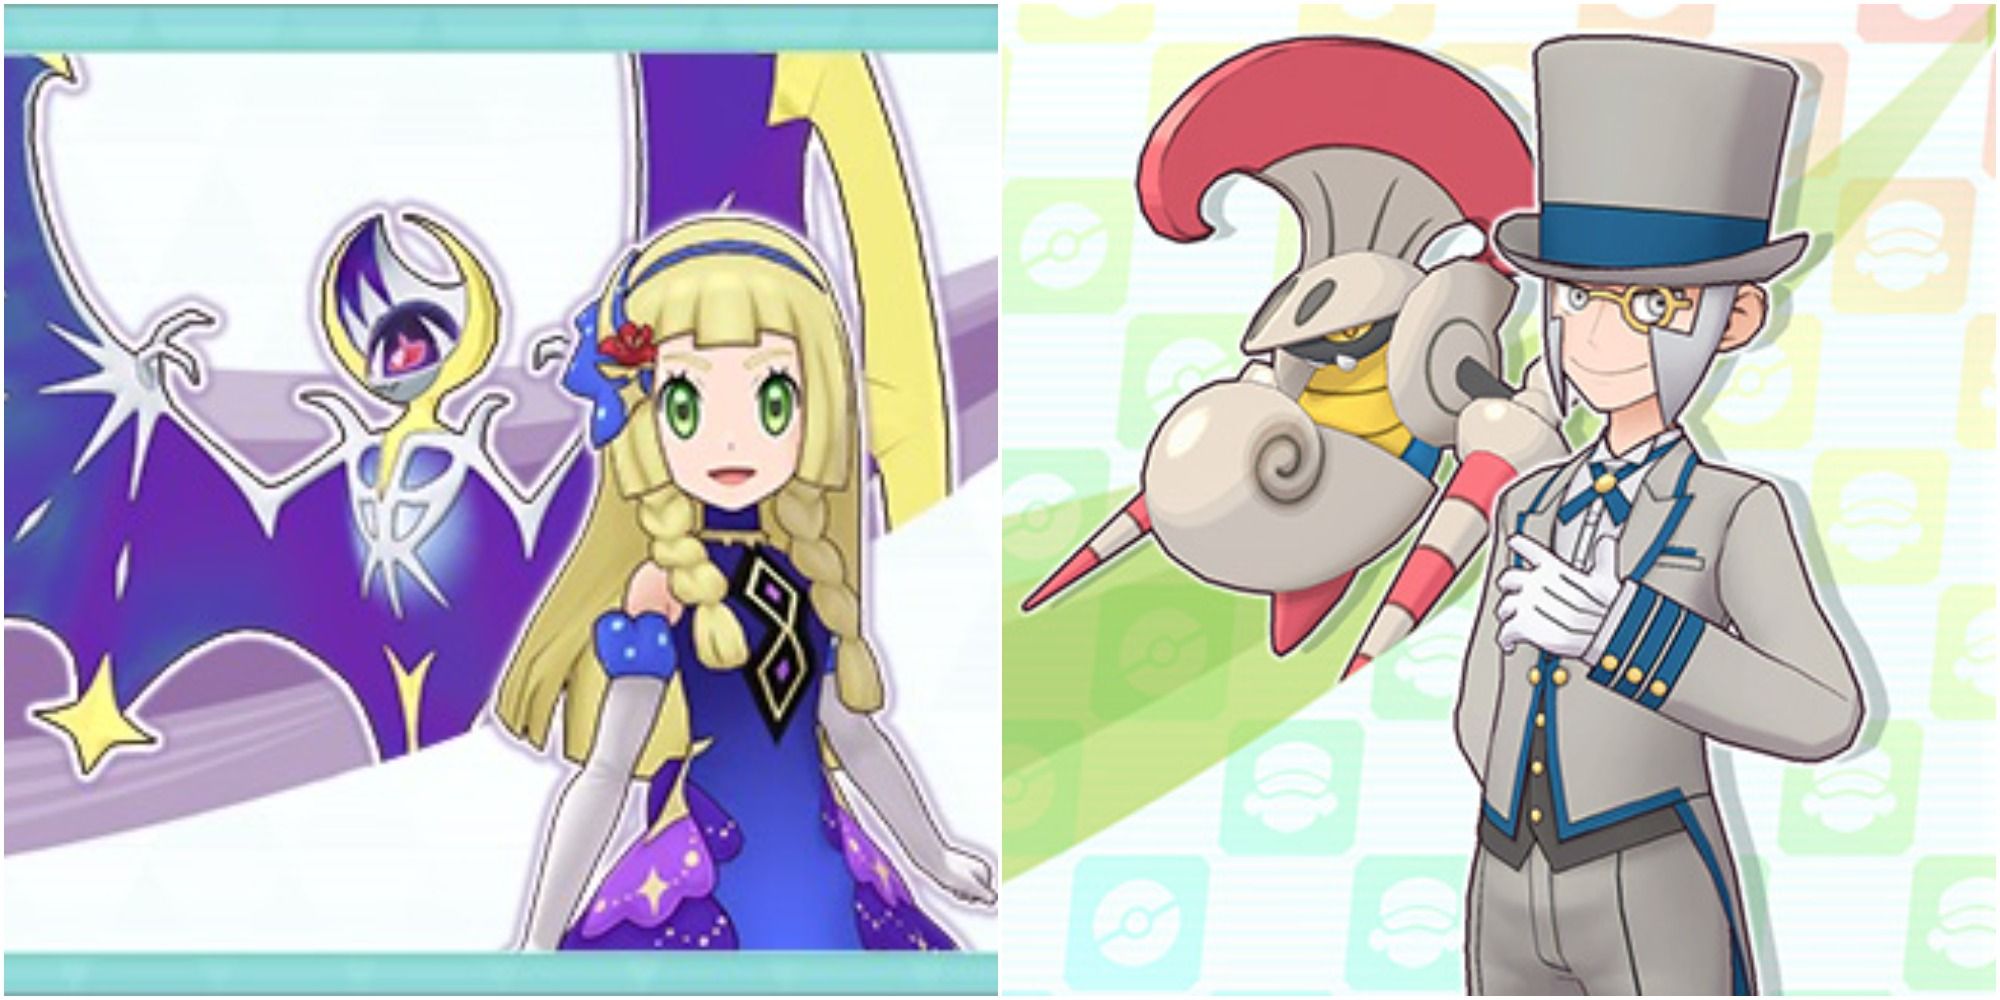  Lillie & Lunala and SC Emmet & Escavalier from Pokemon Masters EX smiling with their partner Pokemon